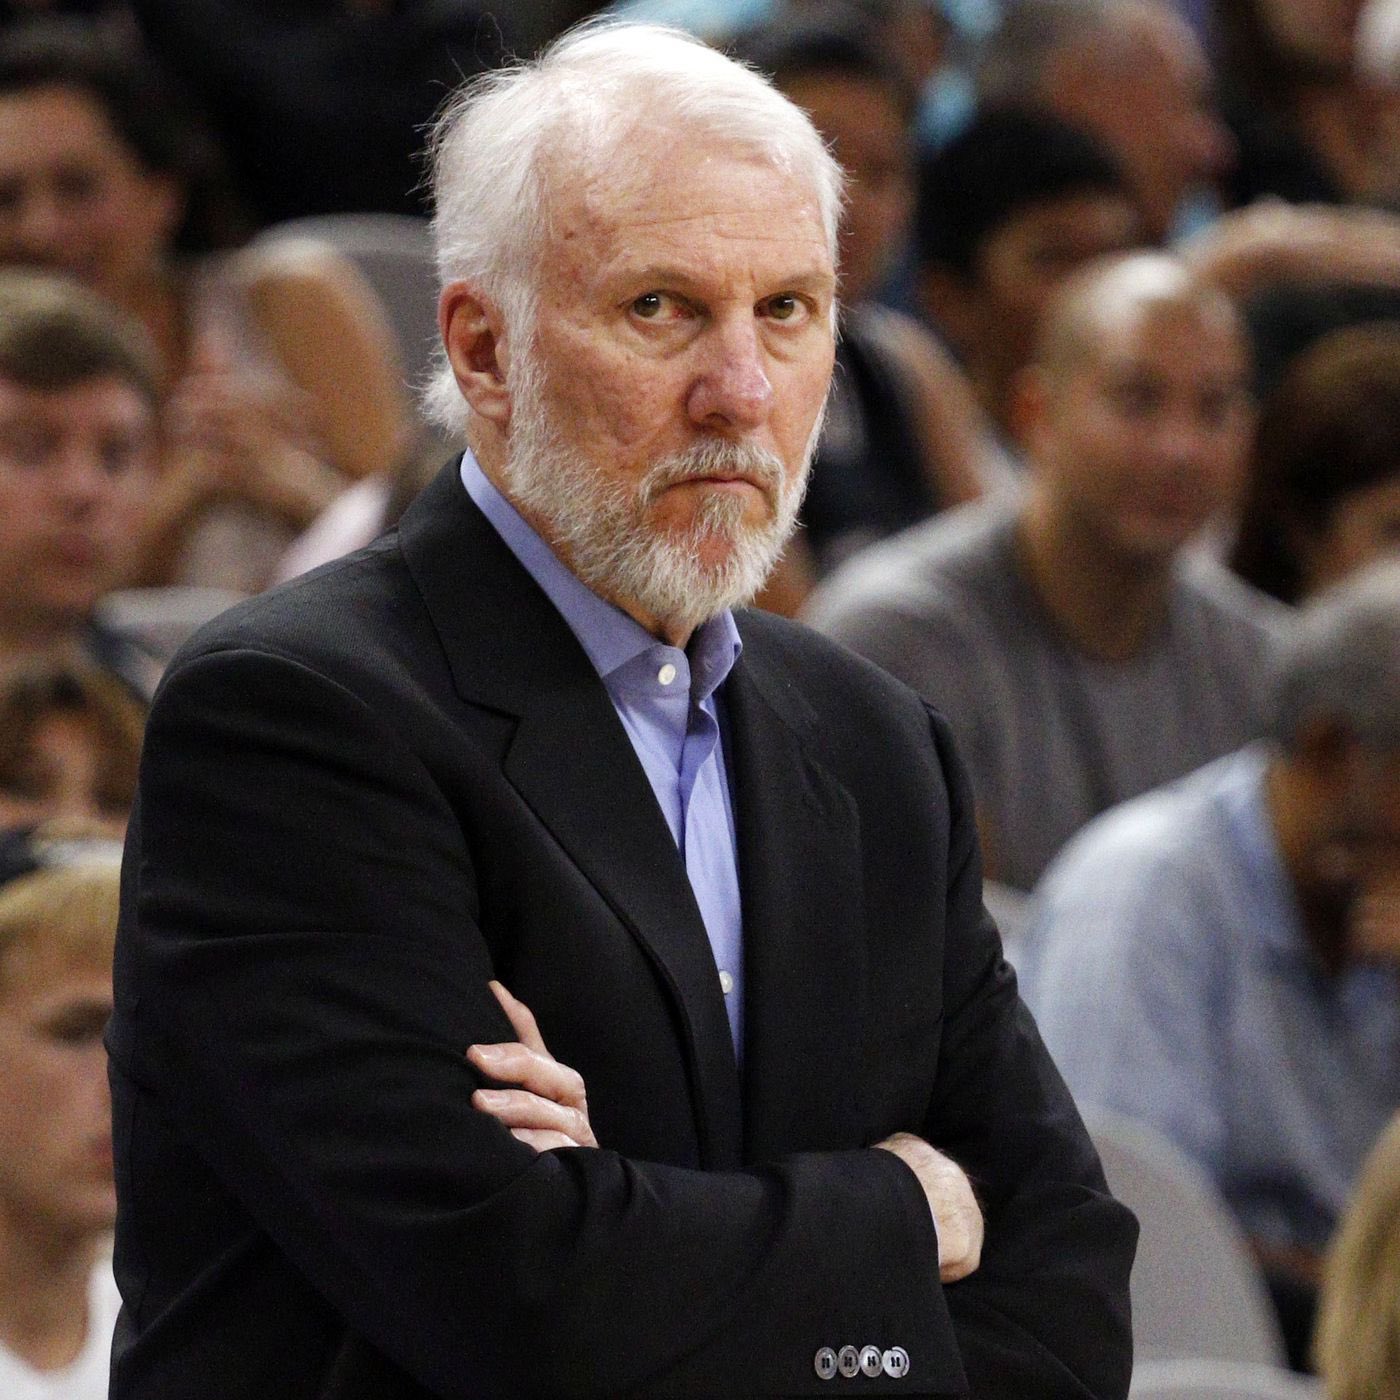 Gregg Popovich Commits to the Spurs: Signs New Five Year Contract Extension.